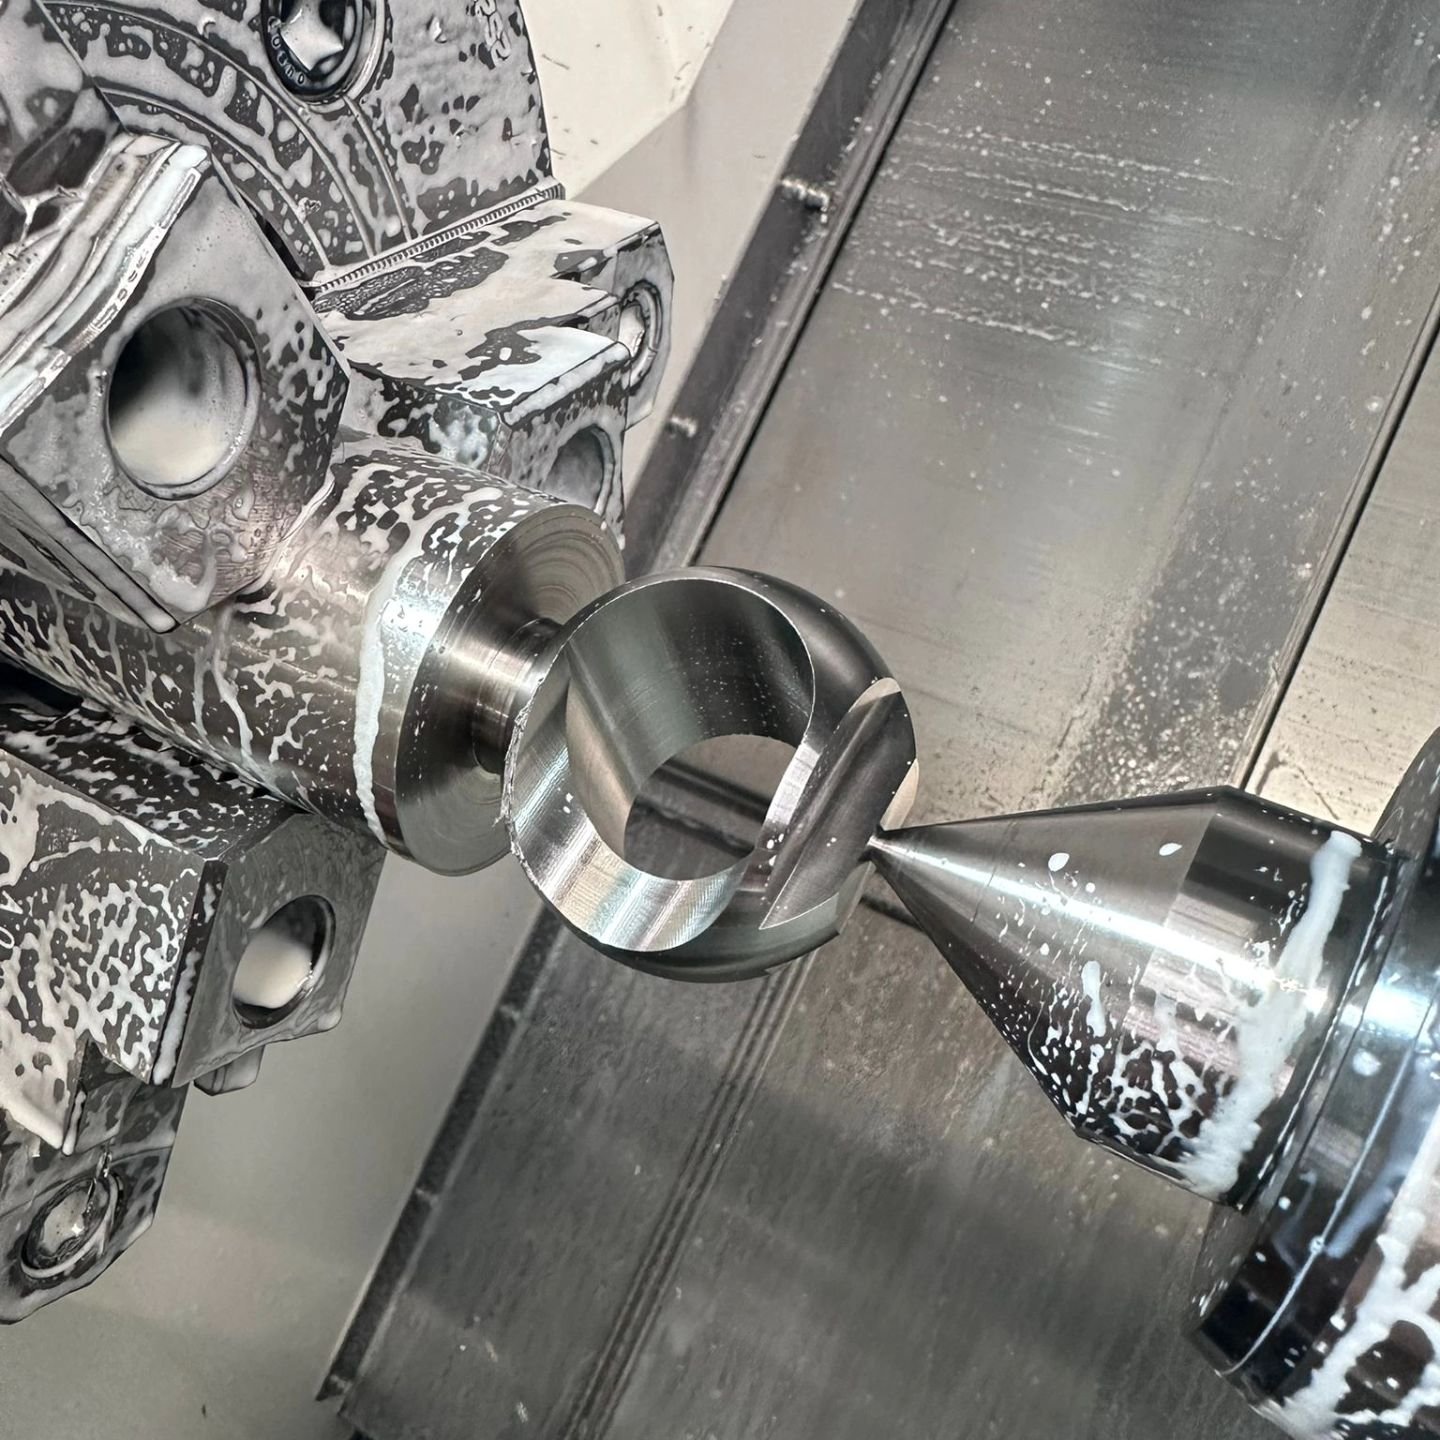 Making the most of our multi-axis turning capabilities!
Check out the Promac website to find out more about our turning section and capacity:

https://www.promacprecision.co.uk/cnc-turning

#machining #cnc #britishmanufacturing #machinist #cncmachini